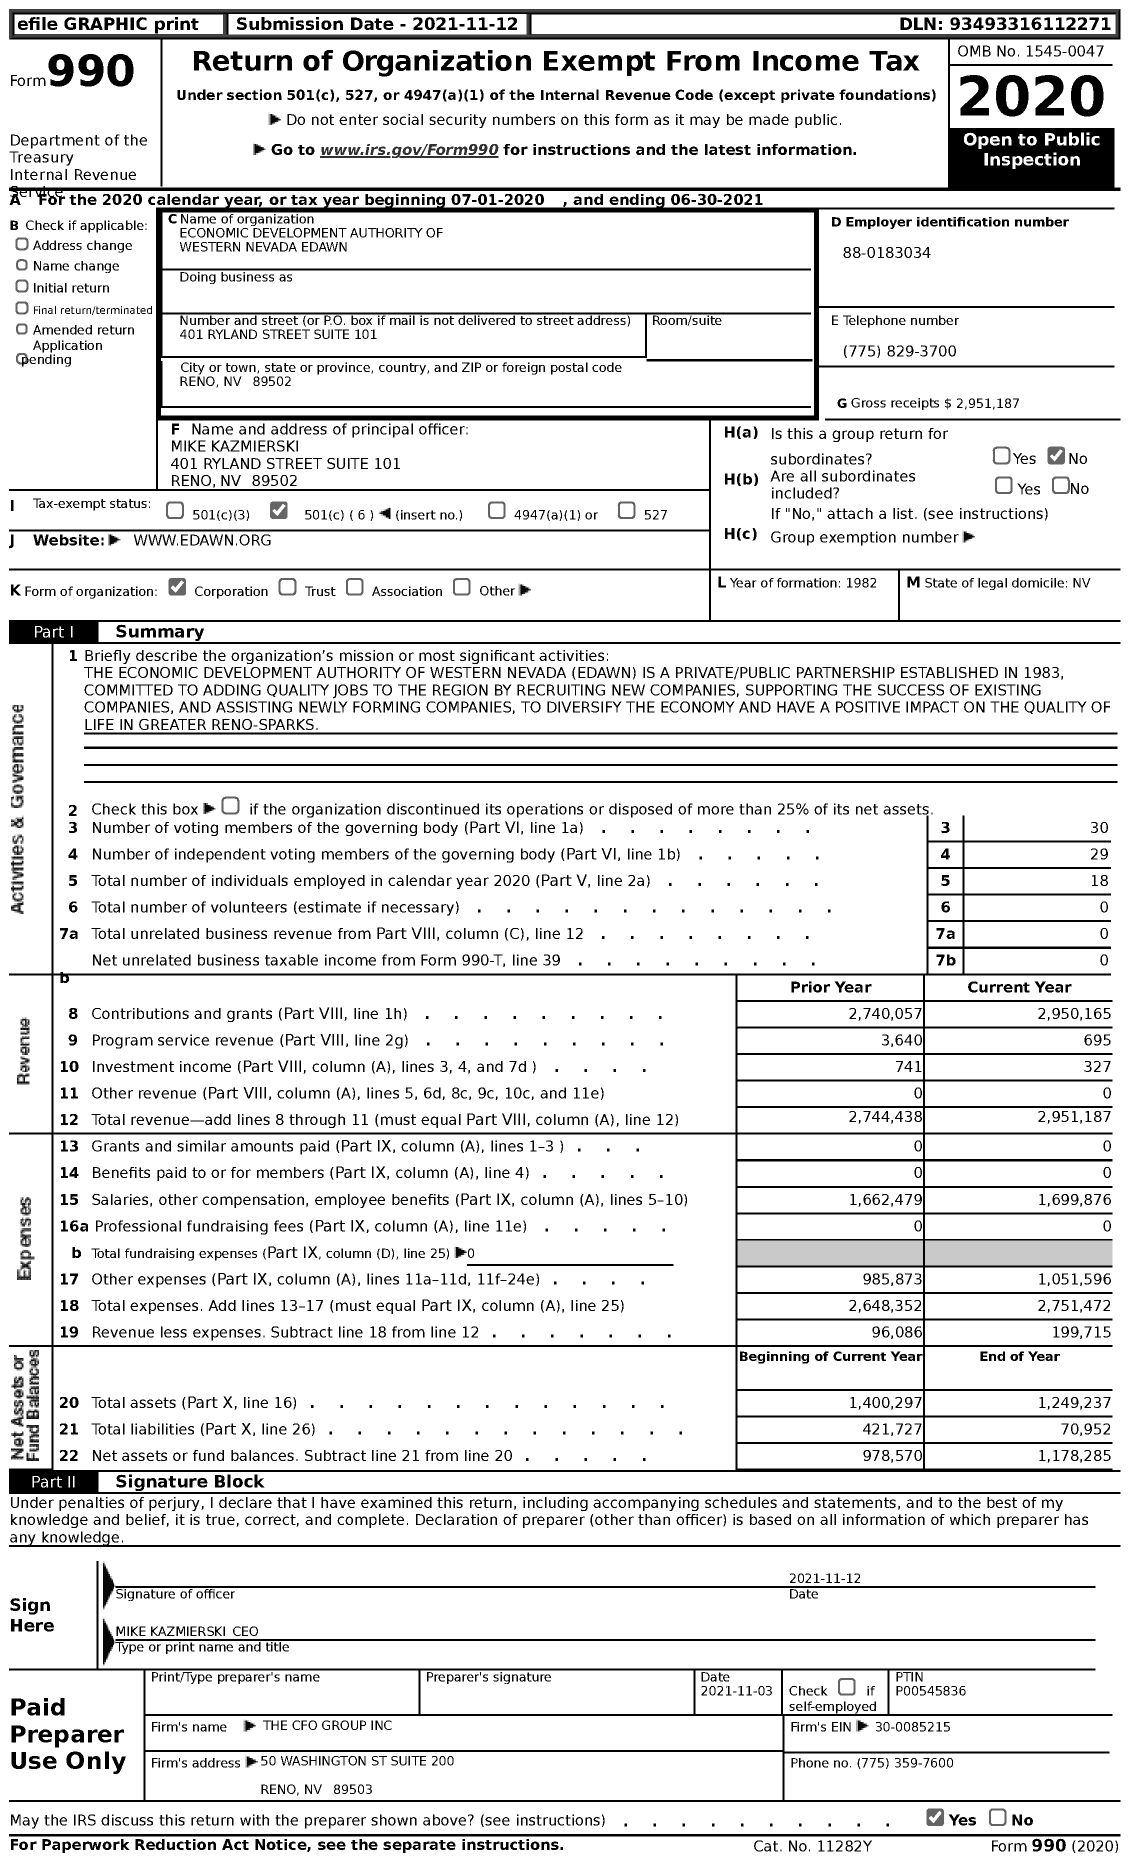 Image of first page of 2020 Form 990 for Economic Development Authority of Western Nevada (EDAWN)